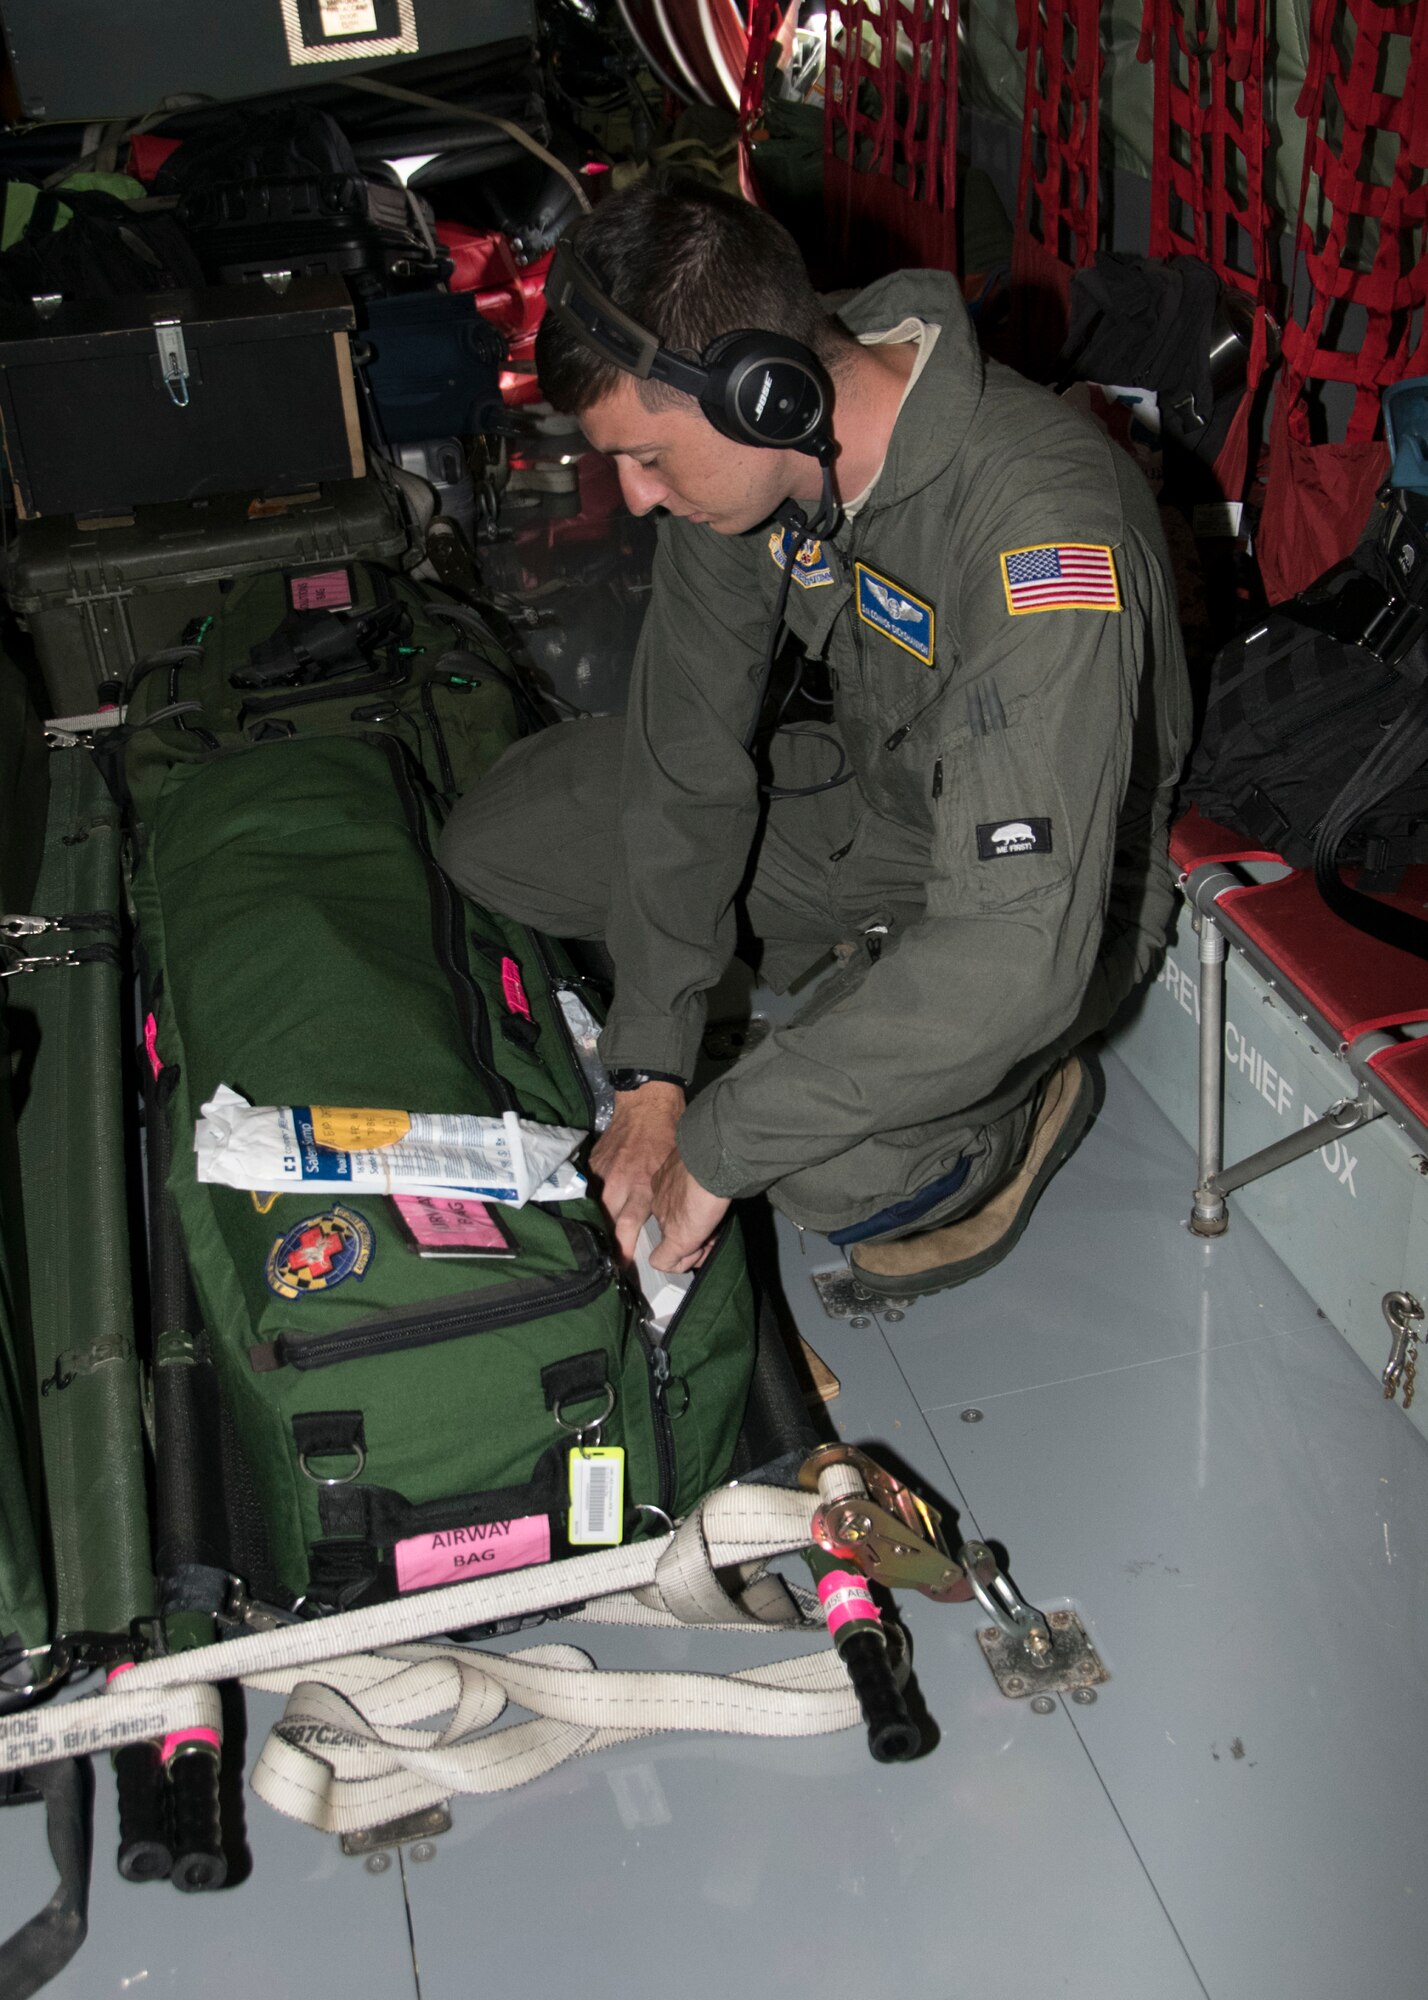 Senior Airman Connor Dick-Shannon, 459th Aeromedical Evacuation Squadron flight medic, gathers medical supplies during an off station trainer on a KC-135 Stratotanker, Sept. 20, 2019. The team participates in local and off station training missions about twice a month to ensure humanitarian and deployment mission readiness. (U.S. Air Force photo by Staff Sgt. Cierra Presentado/Released)